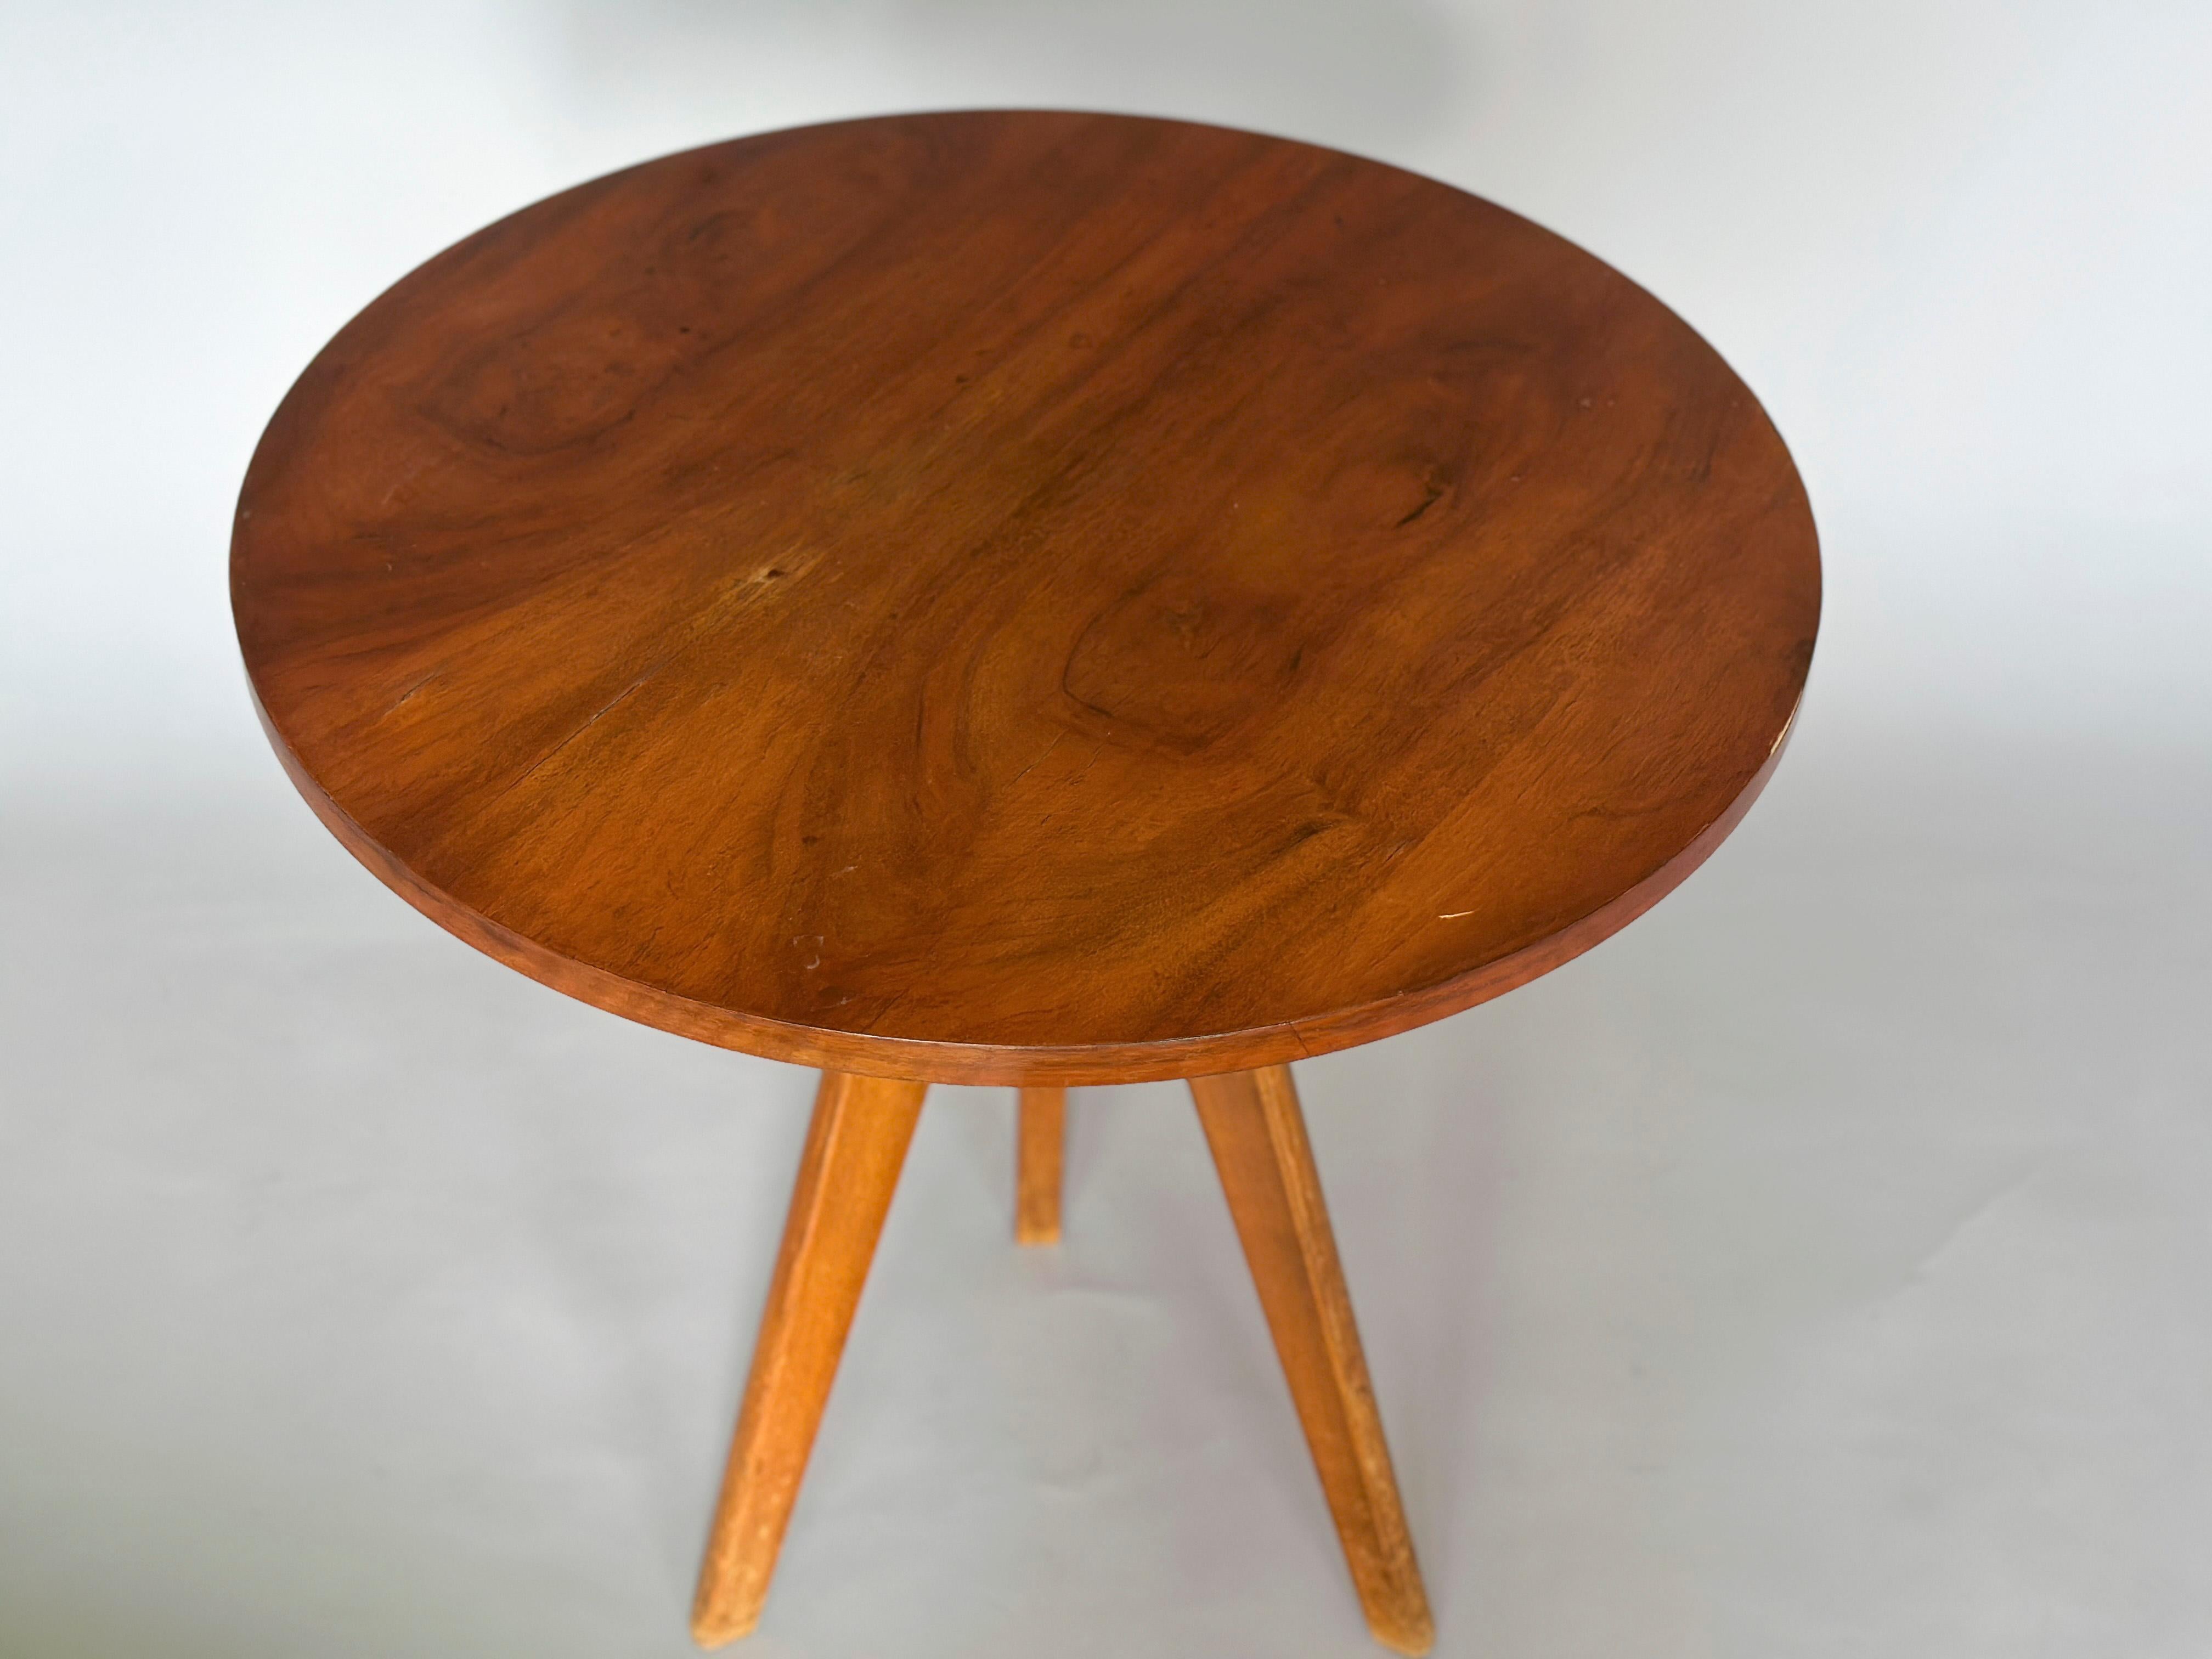 20th Century Mid-Century Modern Coffee Table by Jean Prouve